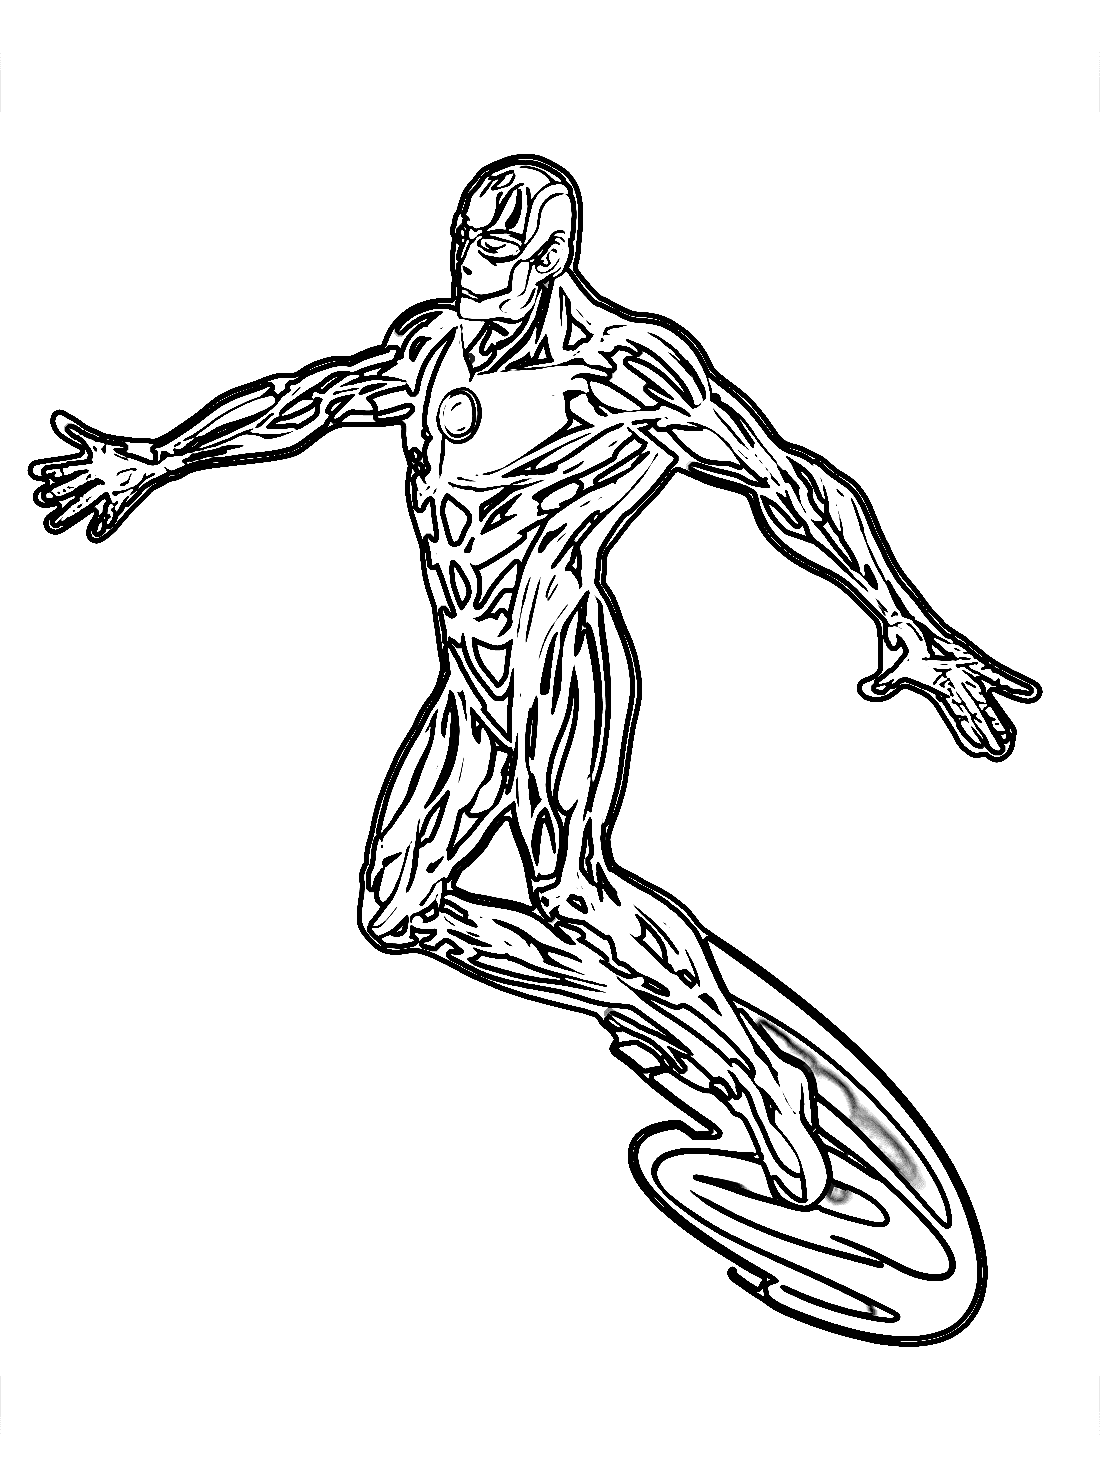 Silver surfer toy